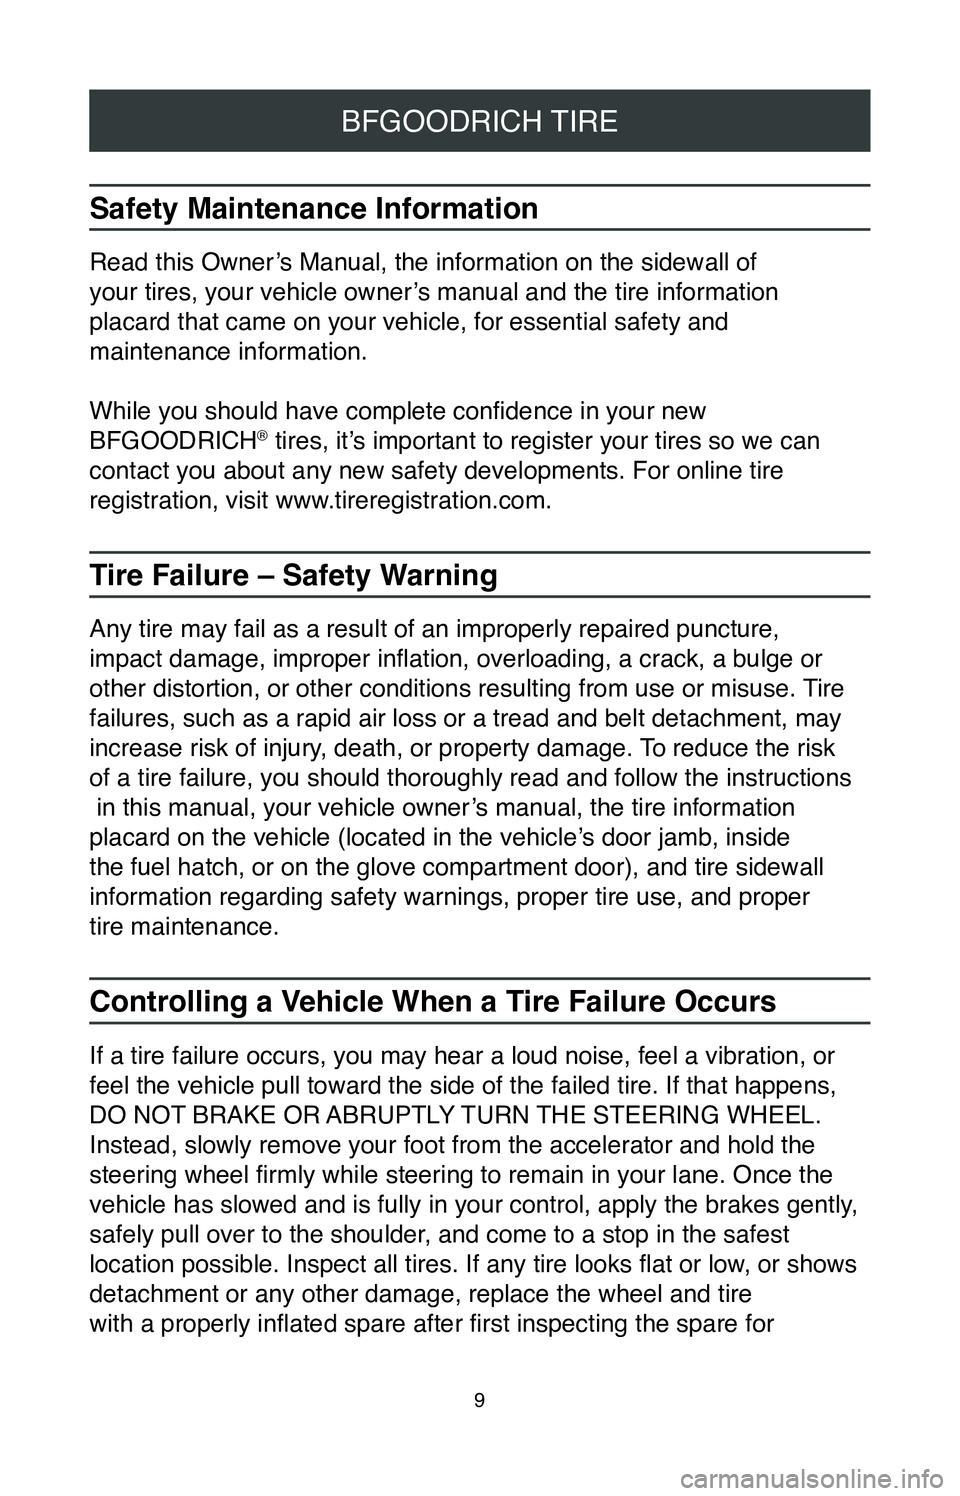 TOYOTA COROLLA HATCHBACK 2020  Warranties & Maintenance Guides (in English) 9
BFGOODRICH TIRE
Safety Maintenance Information
Read this Owner’s Manual, the information on the sidewall of  
your tires, your vehicle owner’s manual and the tire information   
placard that cam